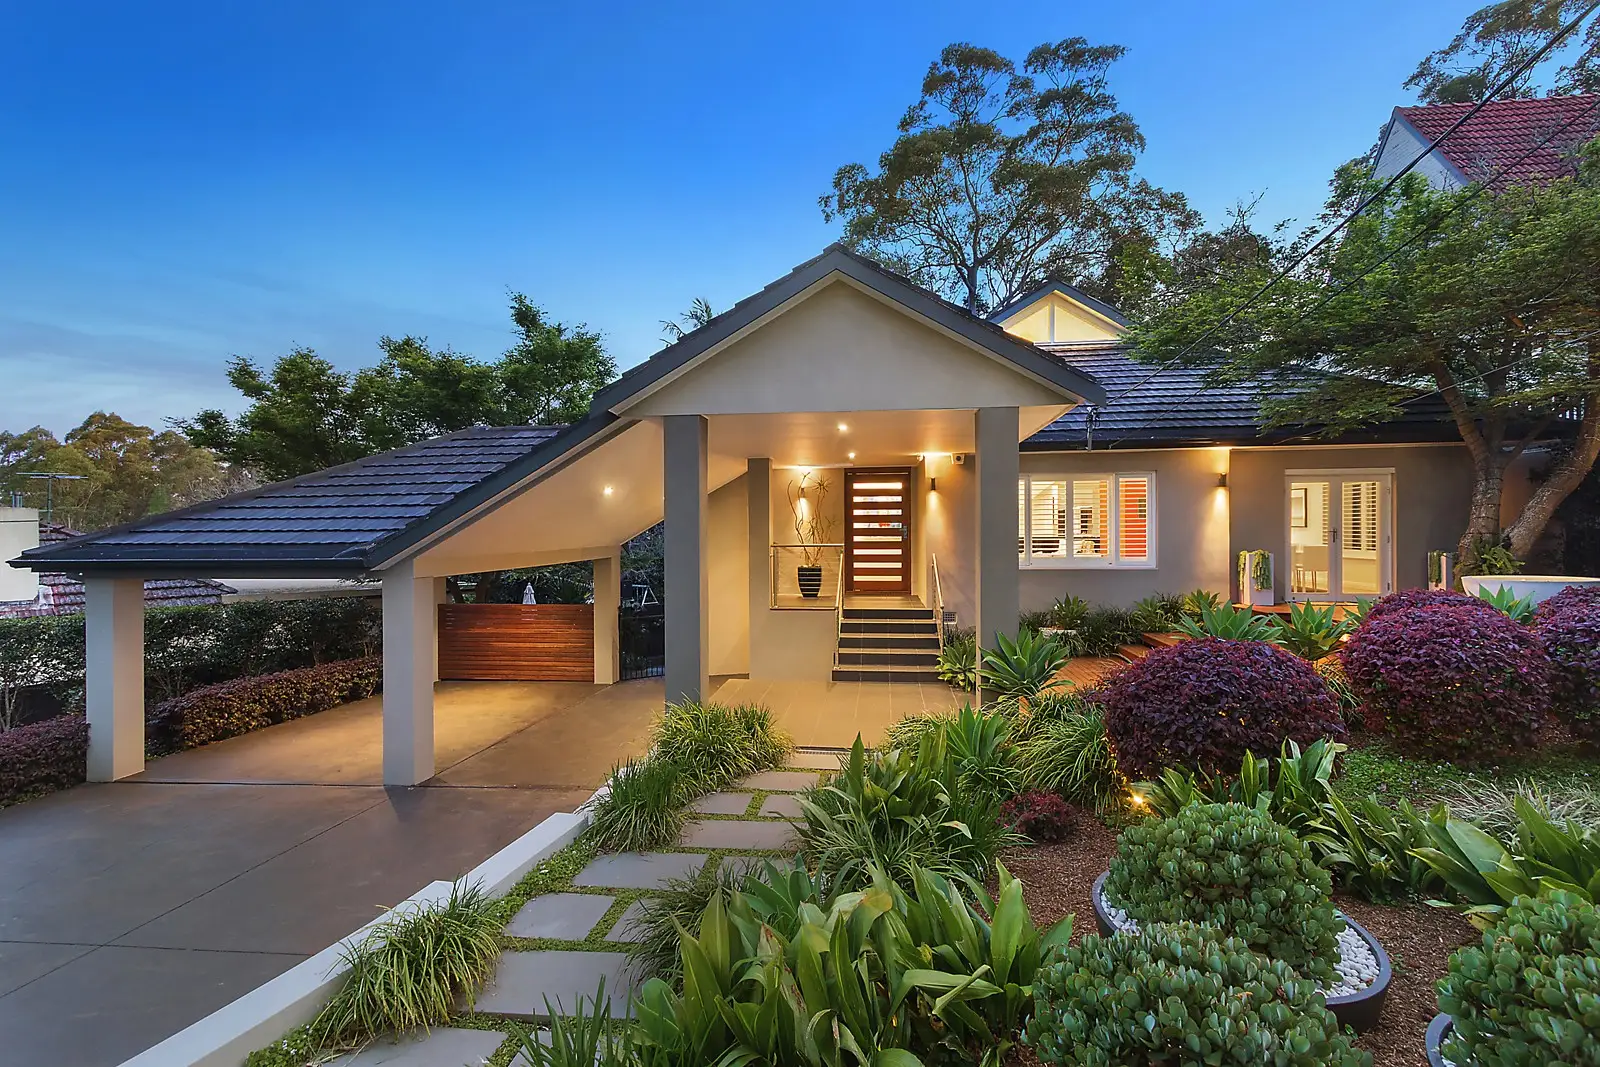 Photo #1: 12 Crown Road, Pymble - Sold by Sydney Sotheby's International Realty